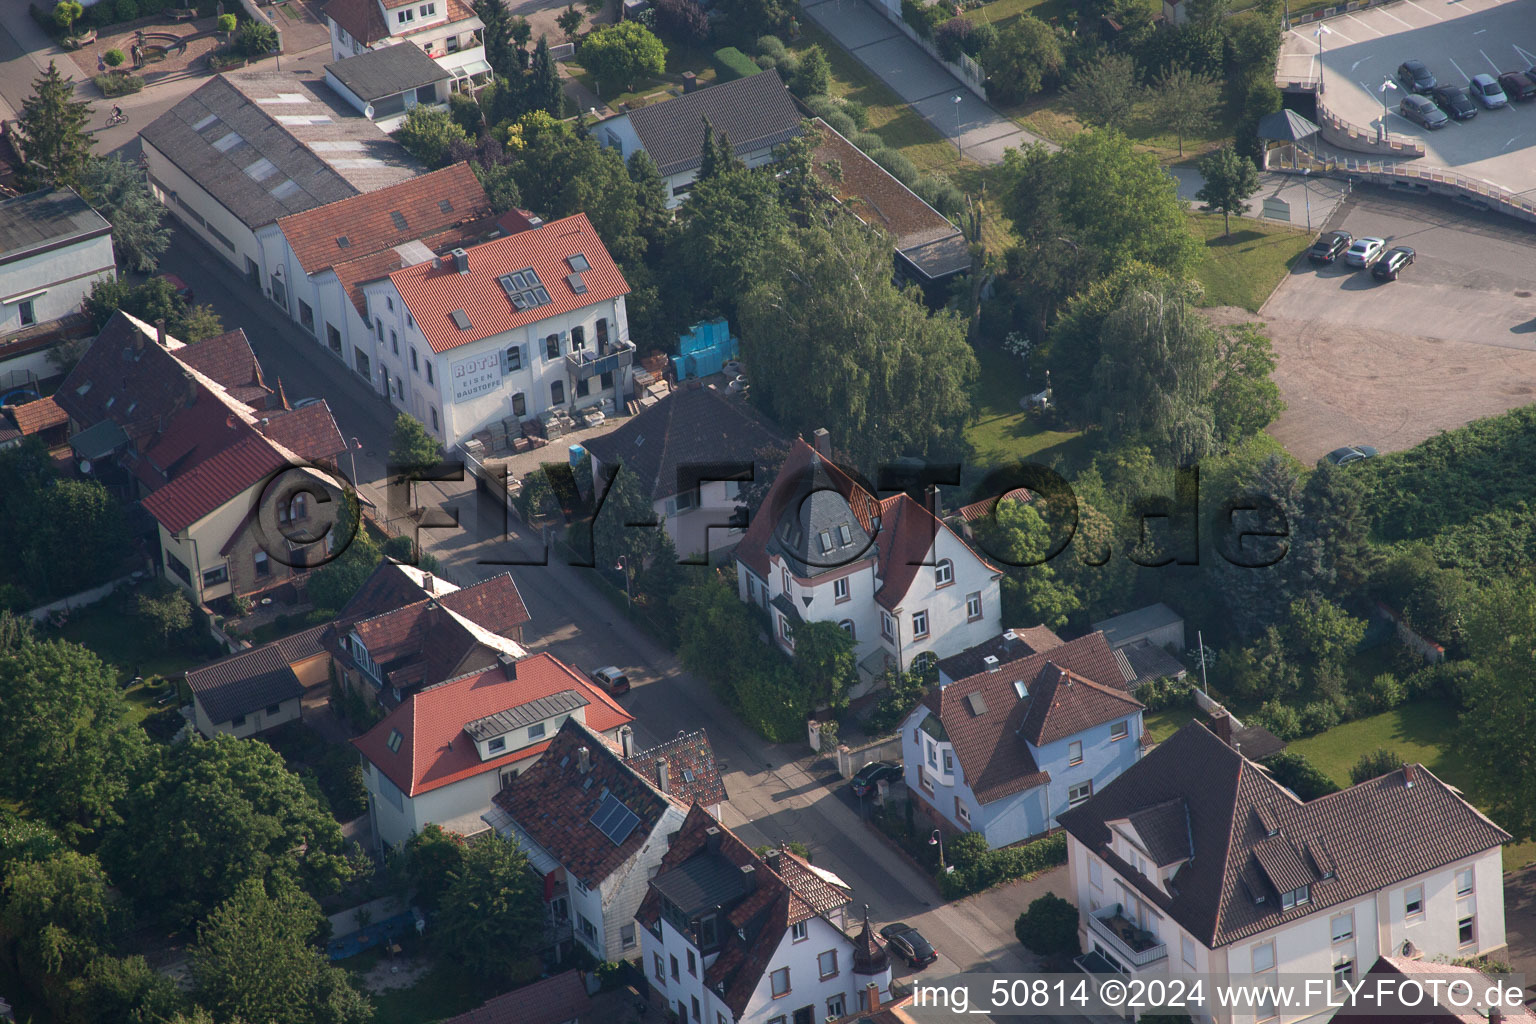 Bismarckstr in Kandel in the state Rhineland-Palatinate, Germany seen from a drone